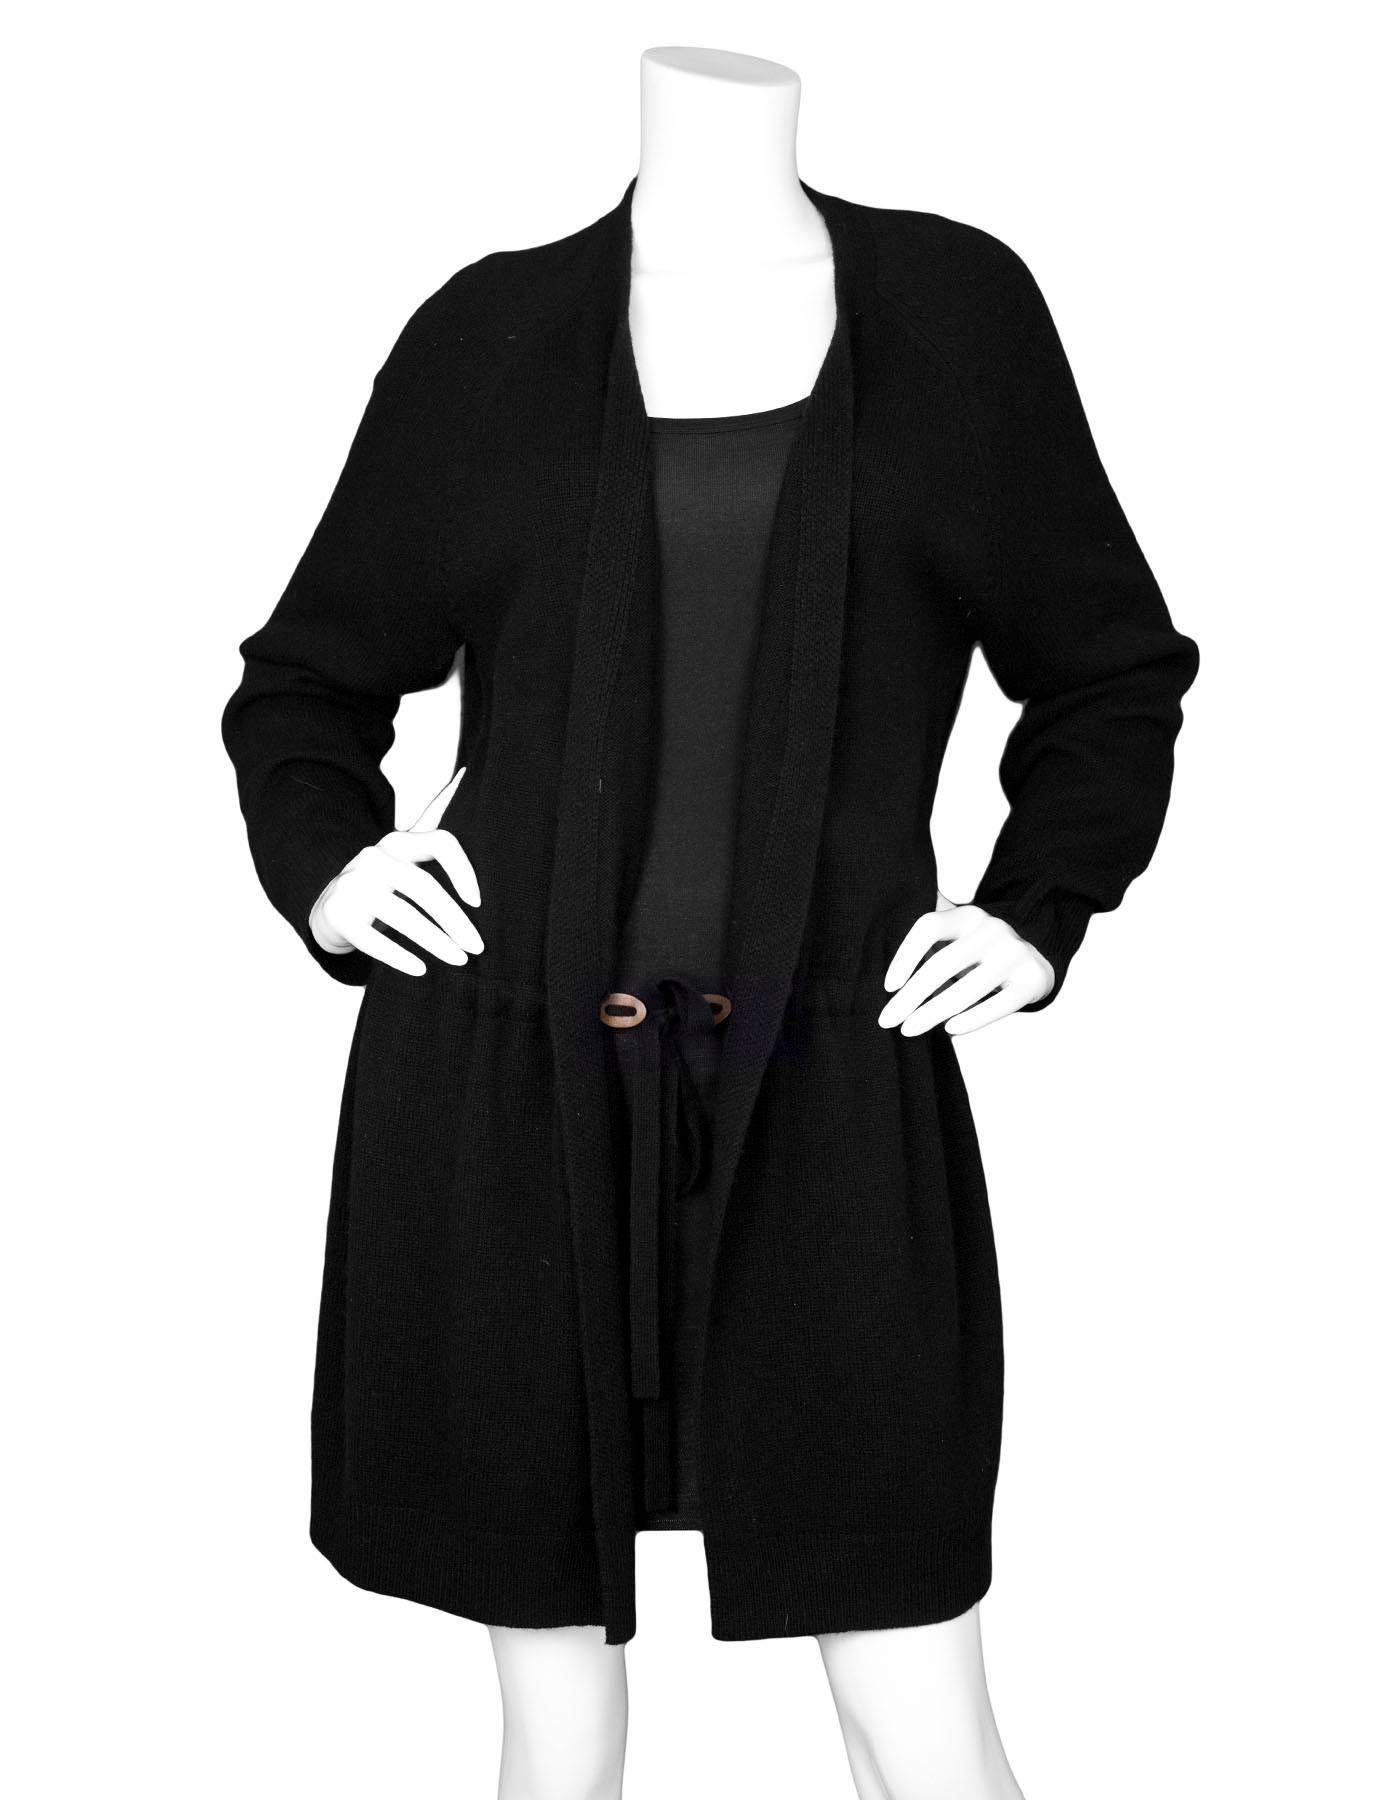 Theory Black Cashmere Long Open Cardigan 
Features drawstring at interior waist for sizing

Made In: China
Color: Black
Composition: 100% cashmere
Lining: None
Closure/Opening: None- open front
Exterior Pockets: None
Interior Pockets: None
Overall